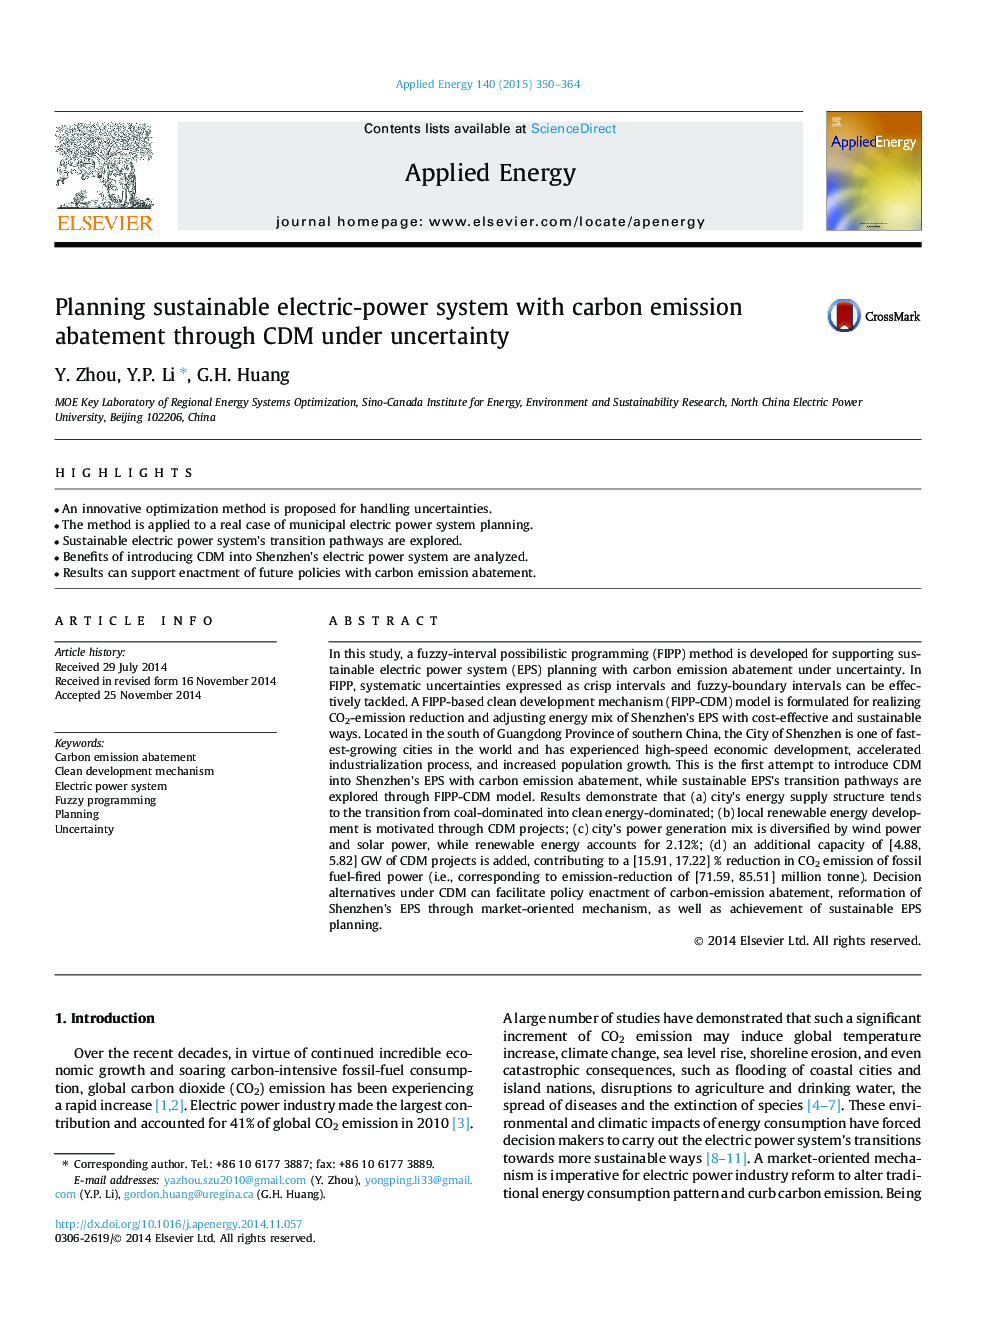 Planning sustainable electric-power system with carbon emission abatement through CDM under uncertainty